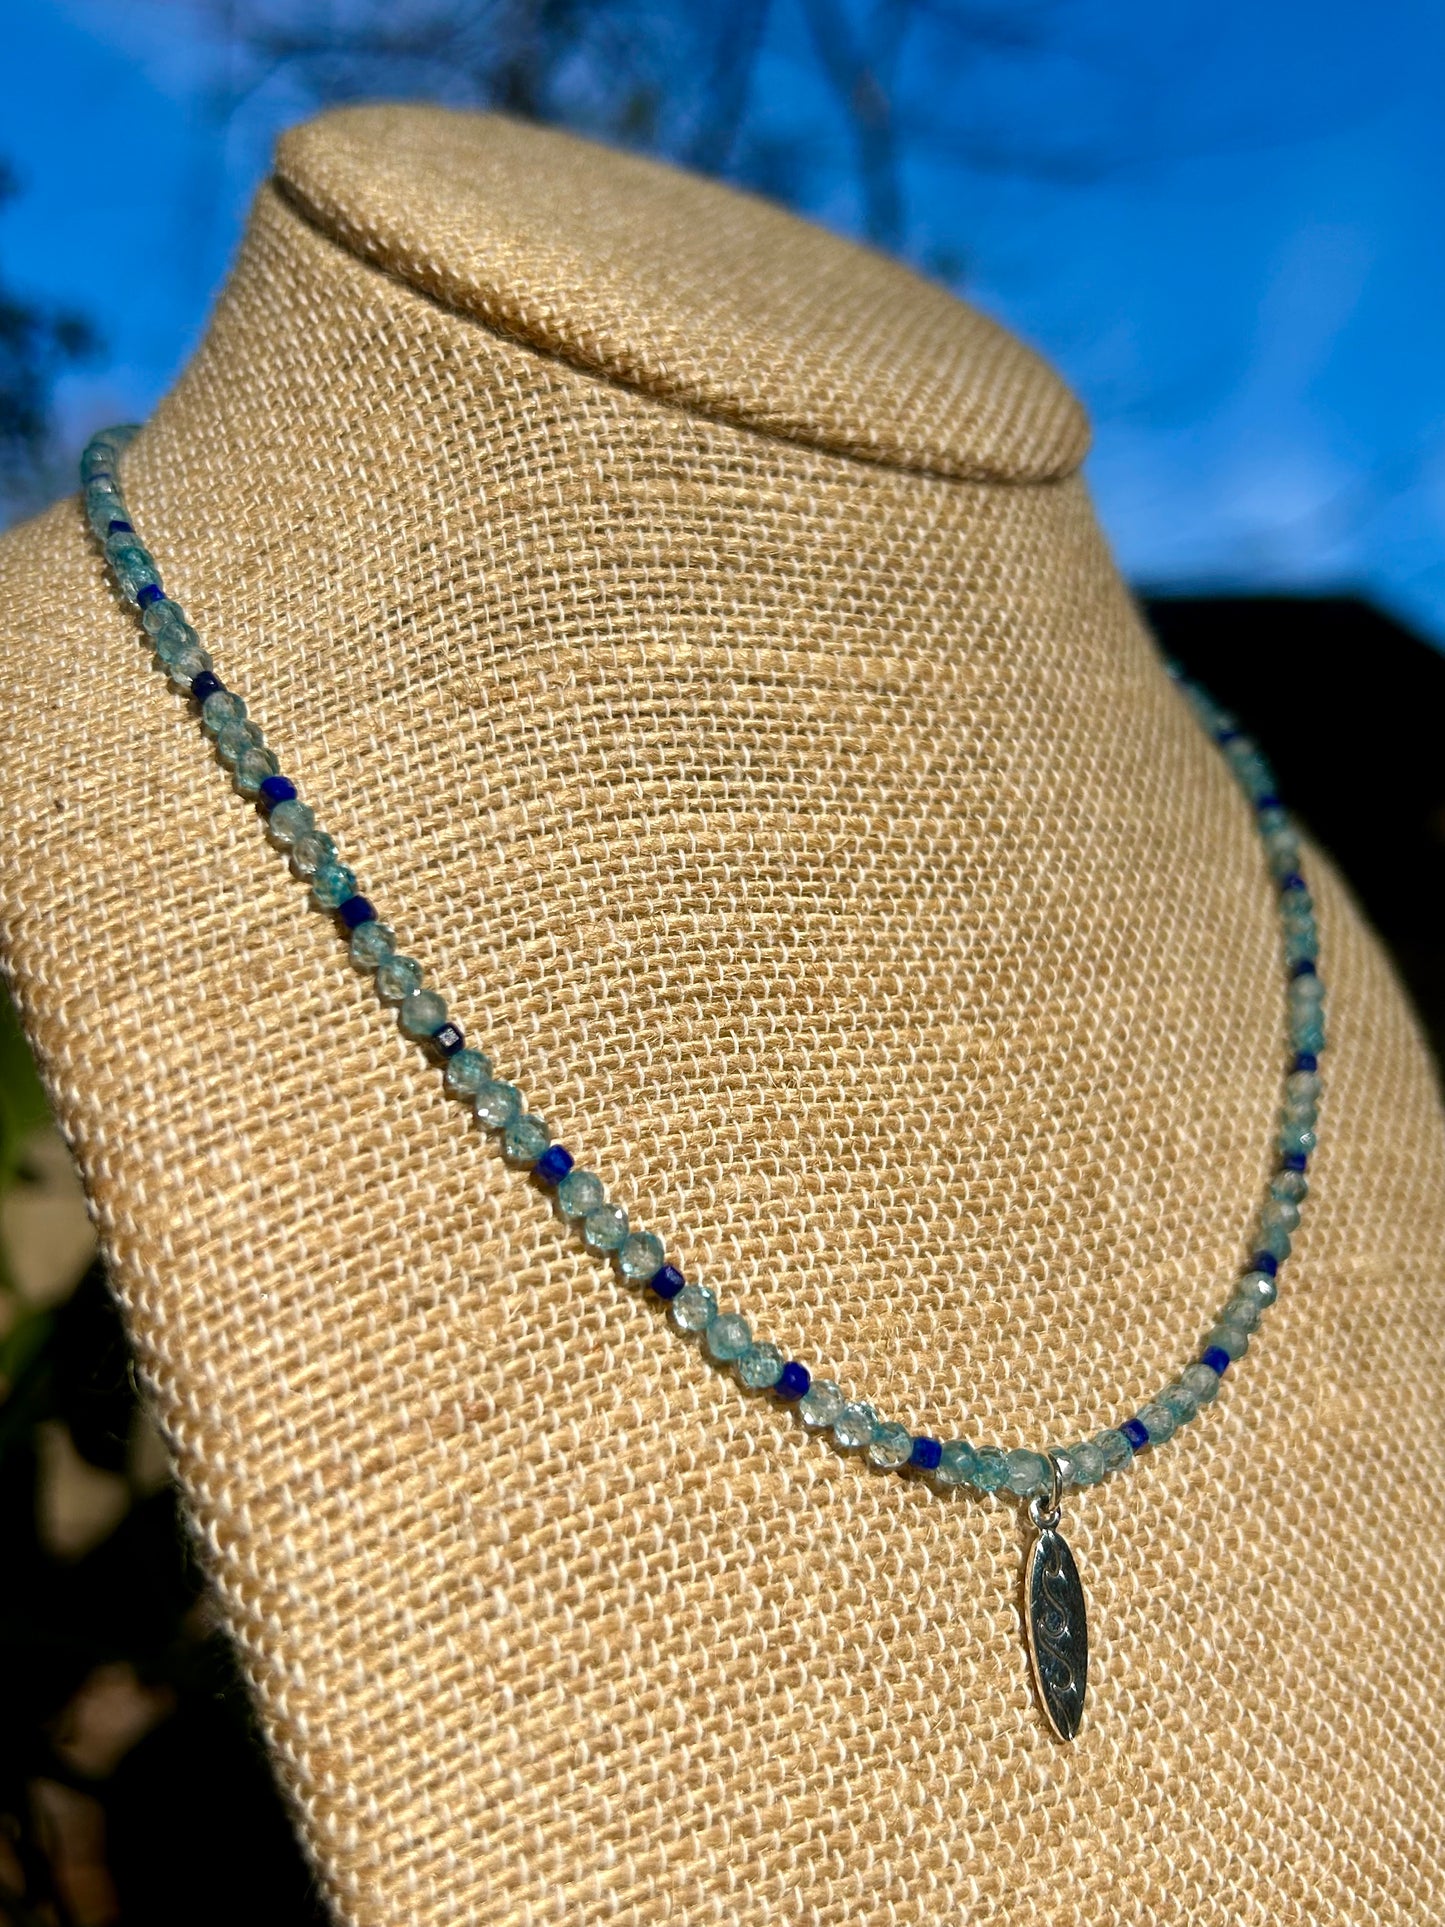 Blue Topaz & Lapis Lazuli with Surfboard Charm Sterling Silver Beaded Choker Necklace